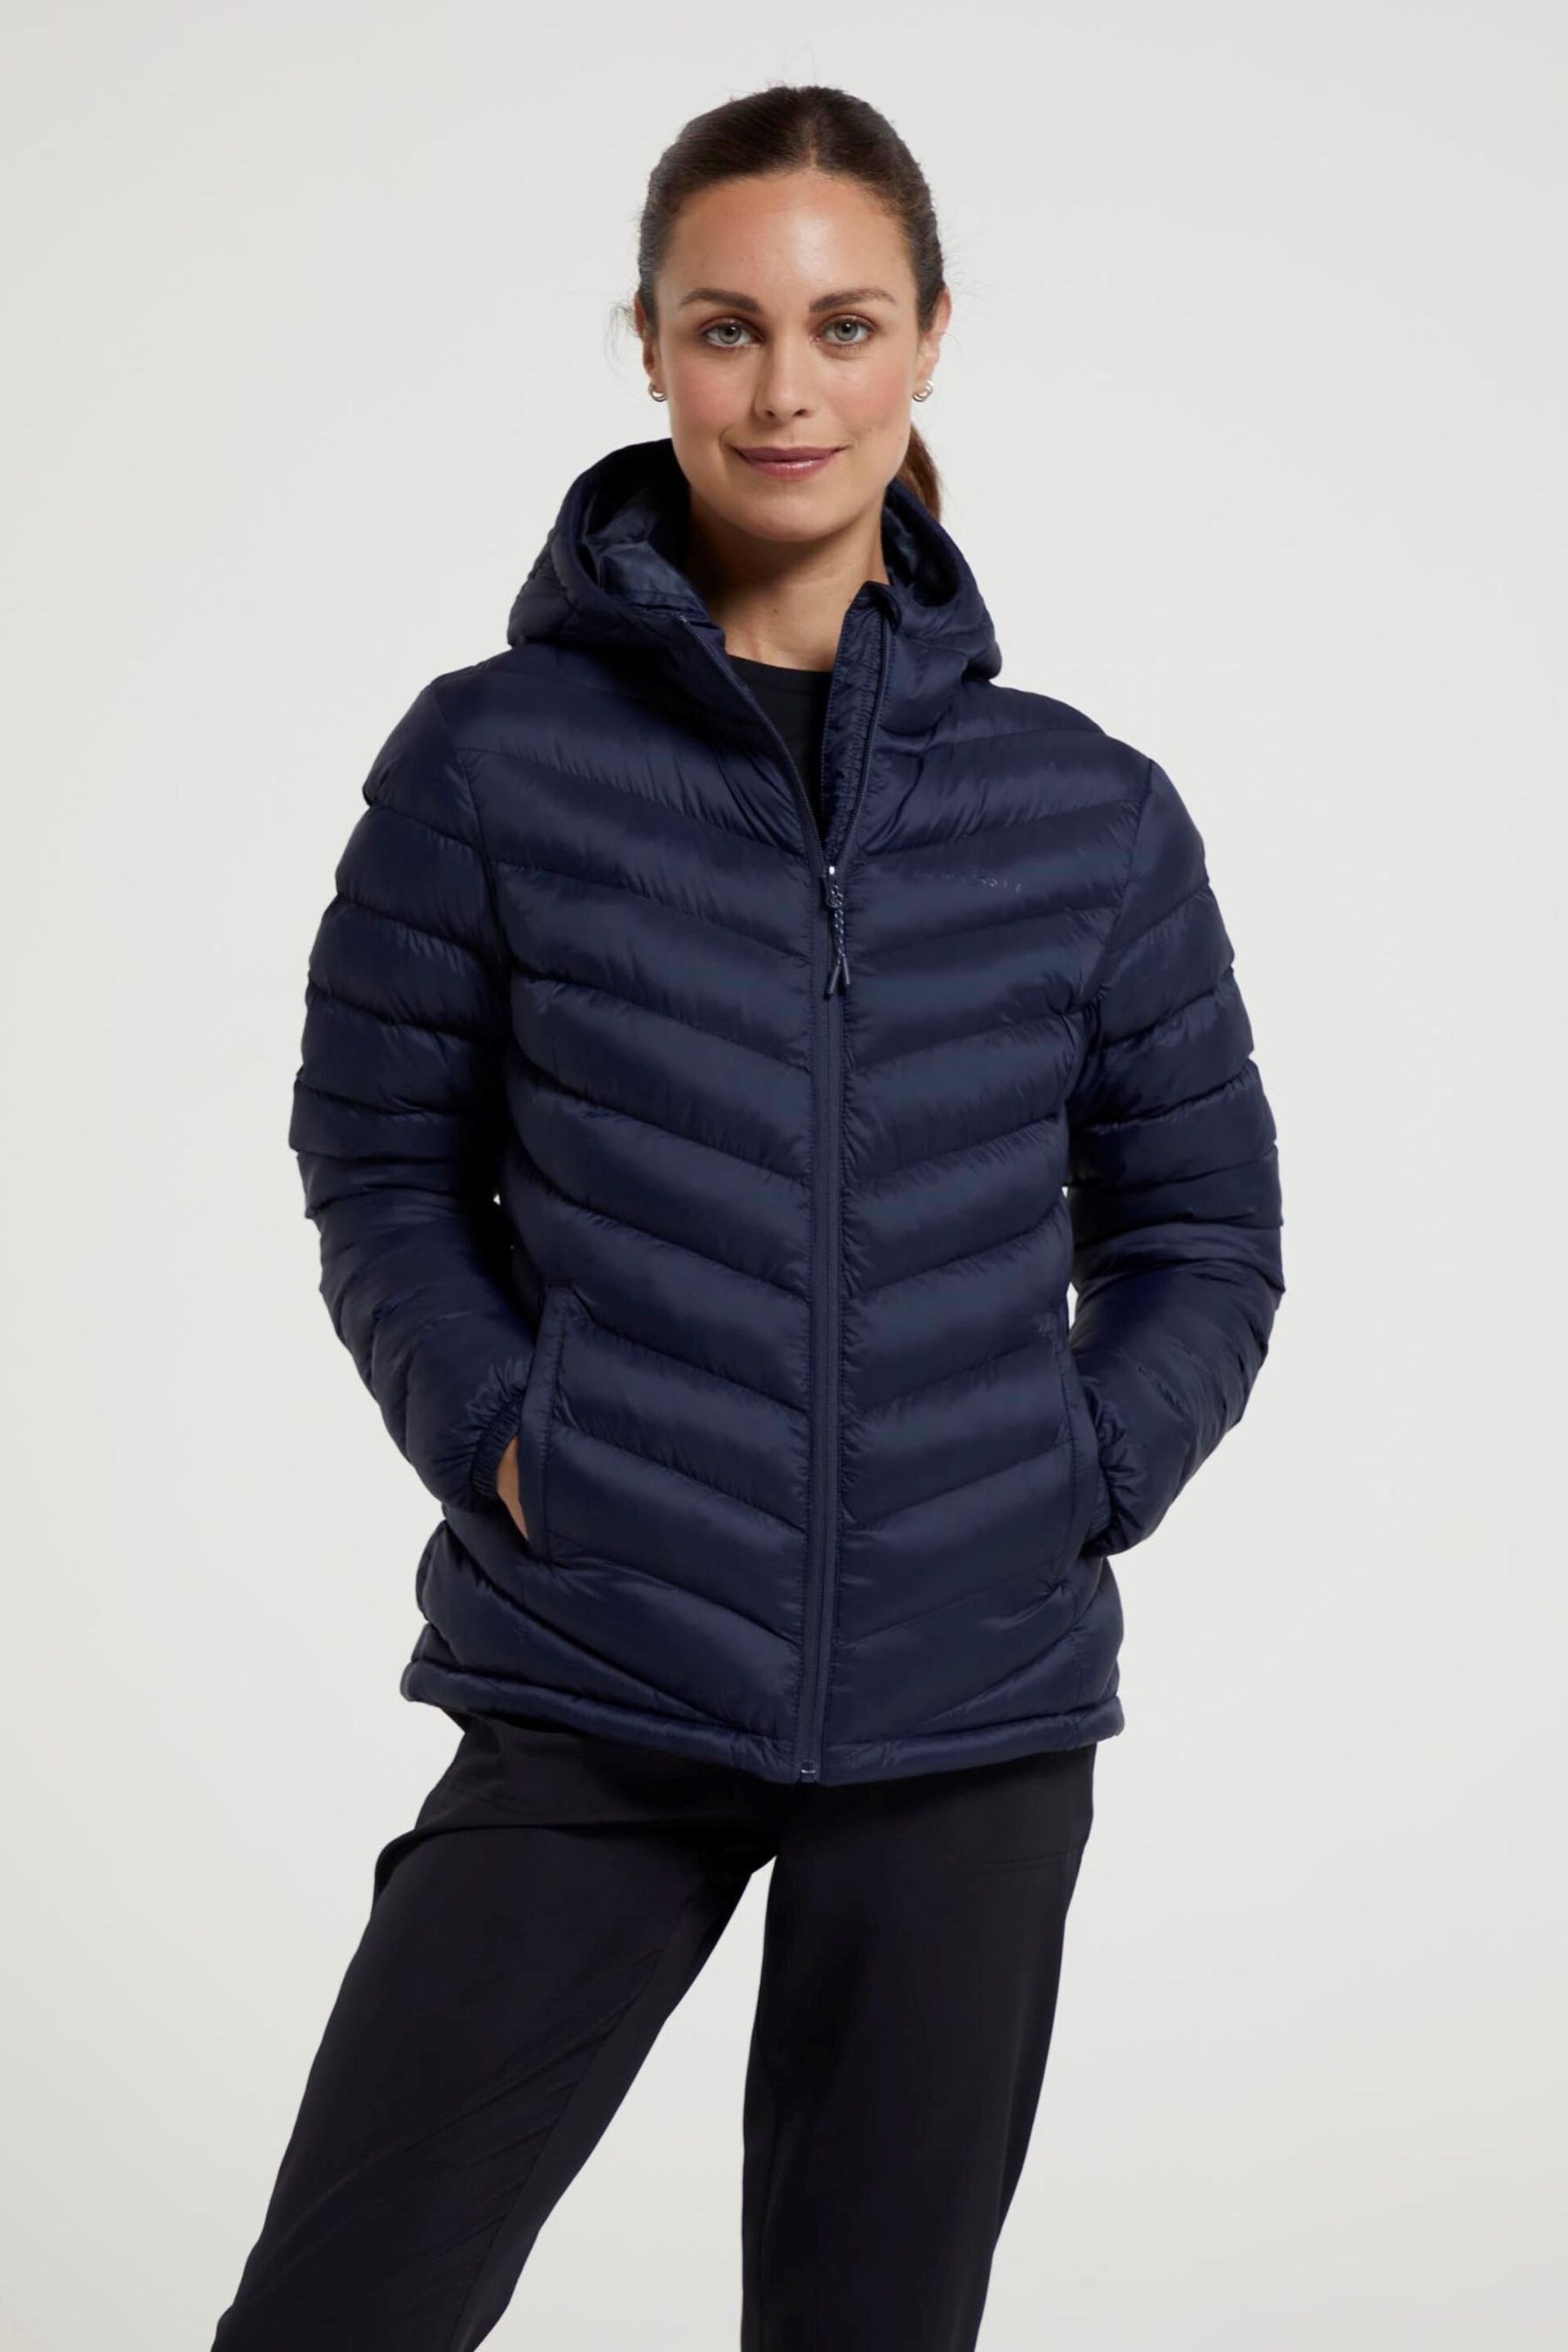 Mountain Warehouse Blue Womens Seasons Water Resistant Padded Jacket - Image 1 of 9